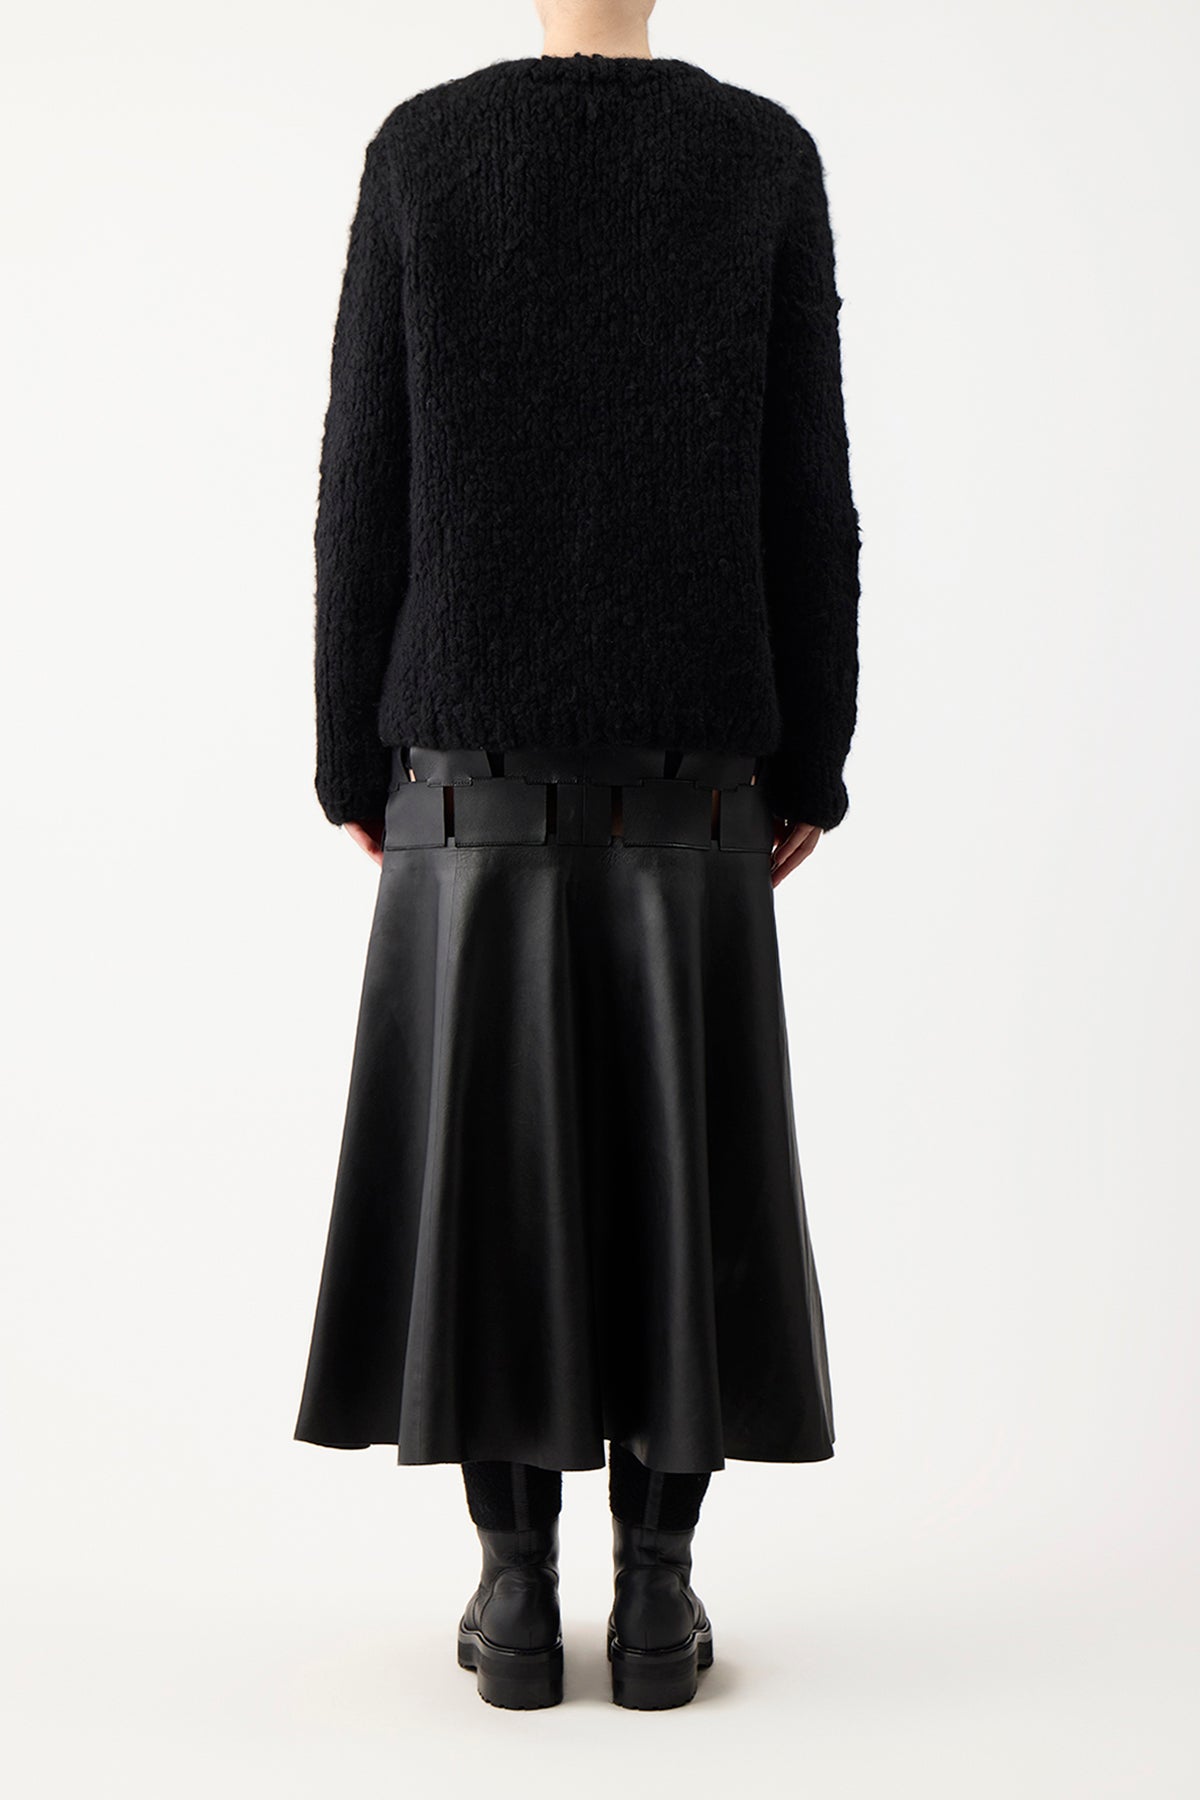 Lawrence Sweater in Black Welfat Cashmere